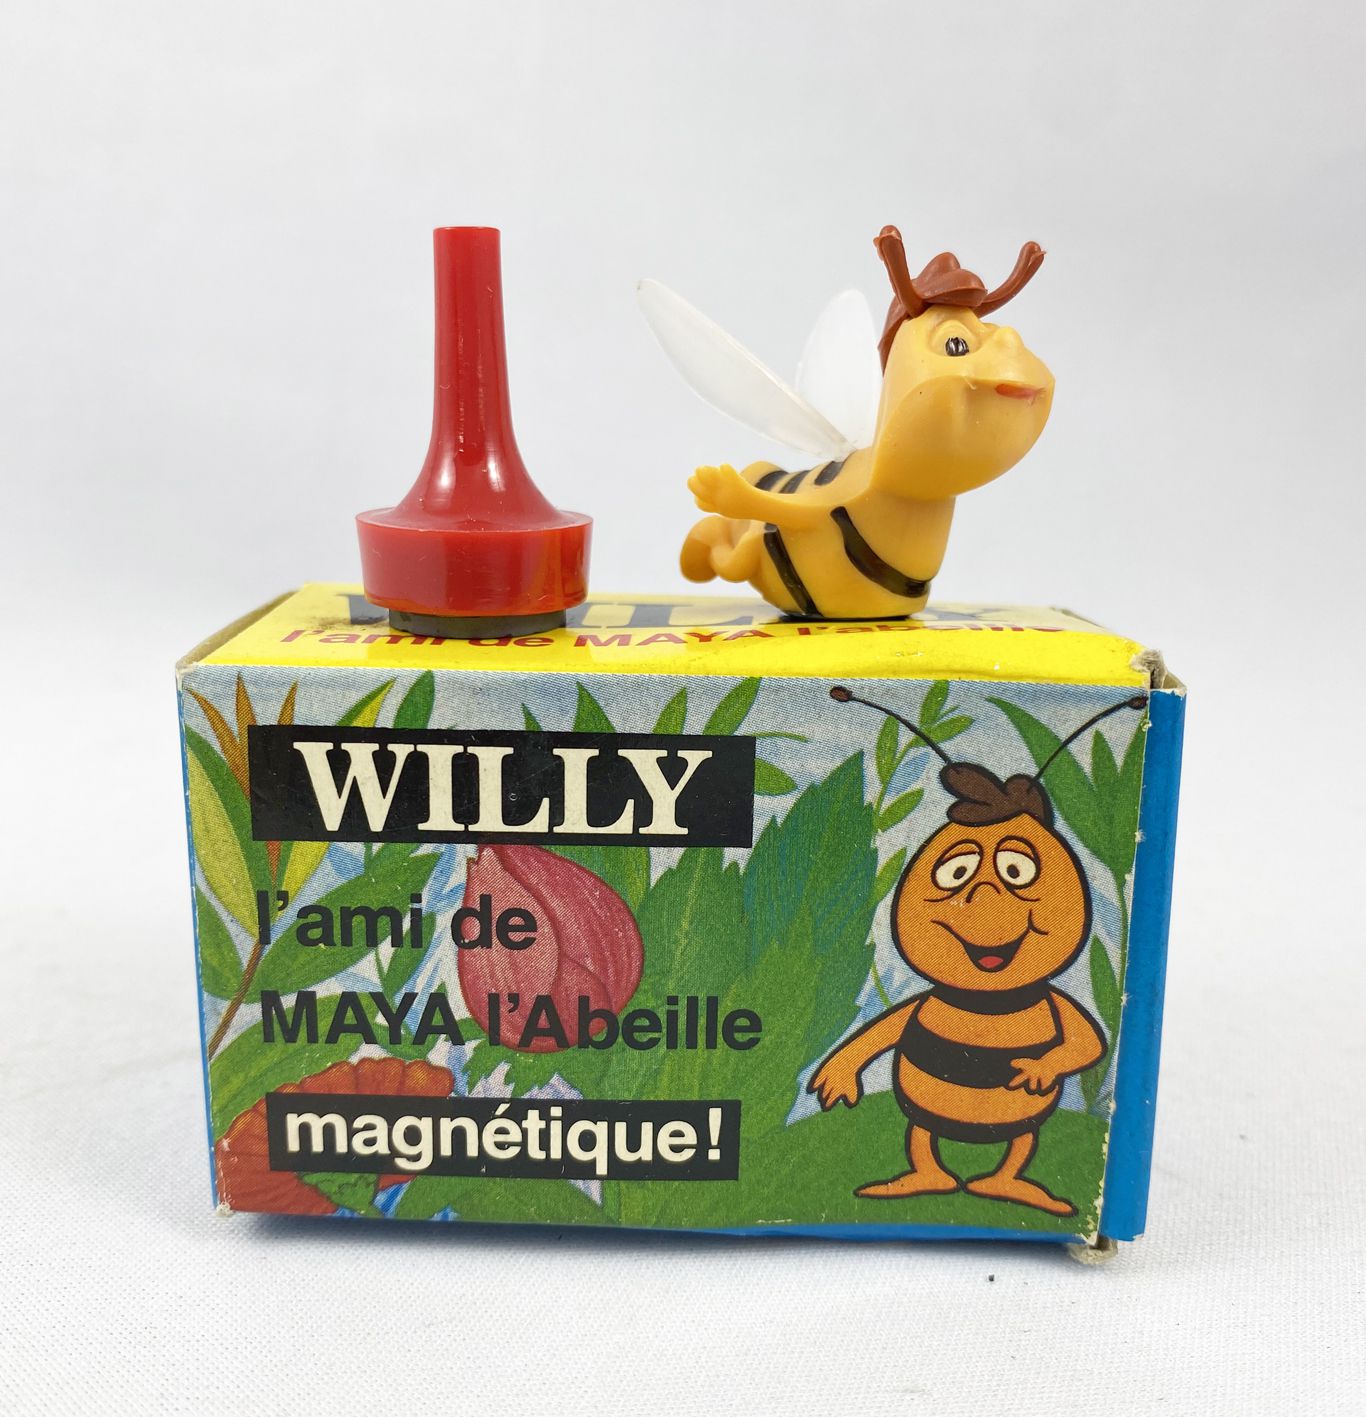 Maya the Bee - Magnetic Willy - Magneto n°3144 (1977)